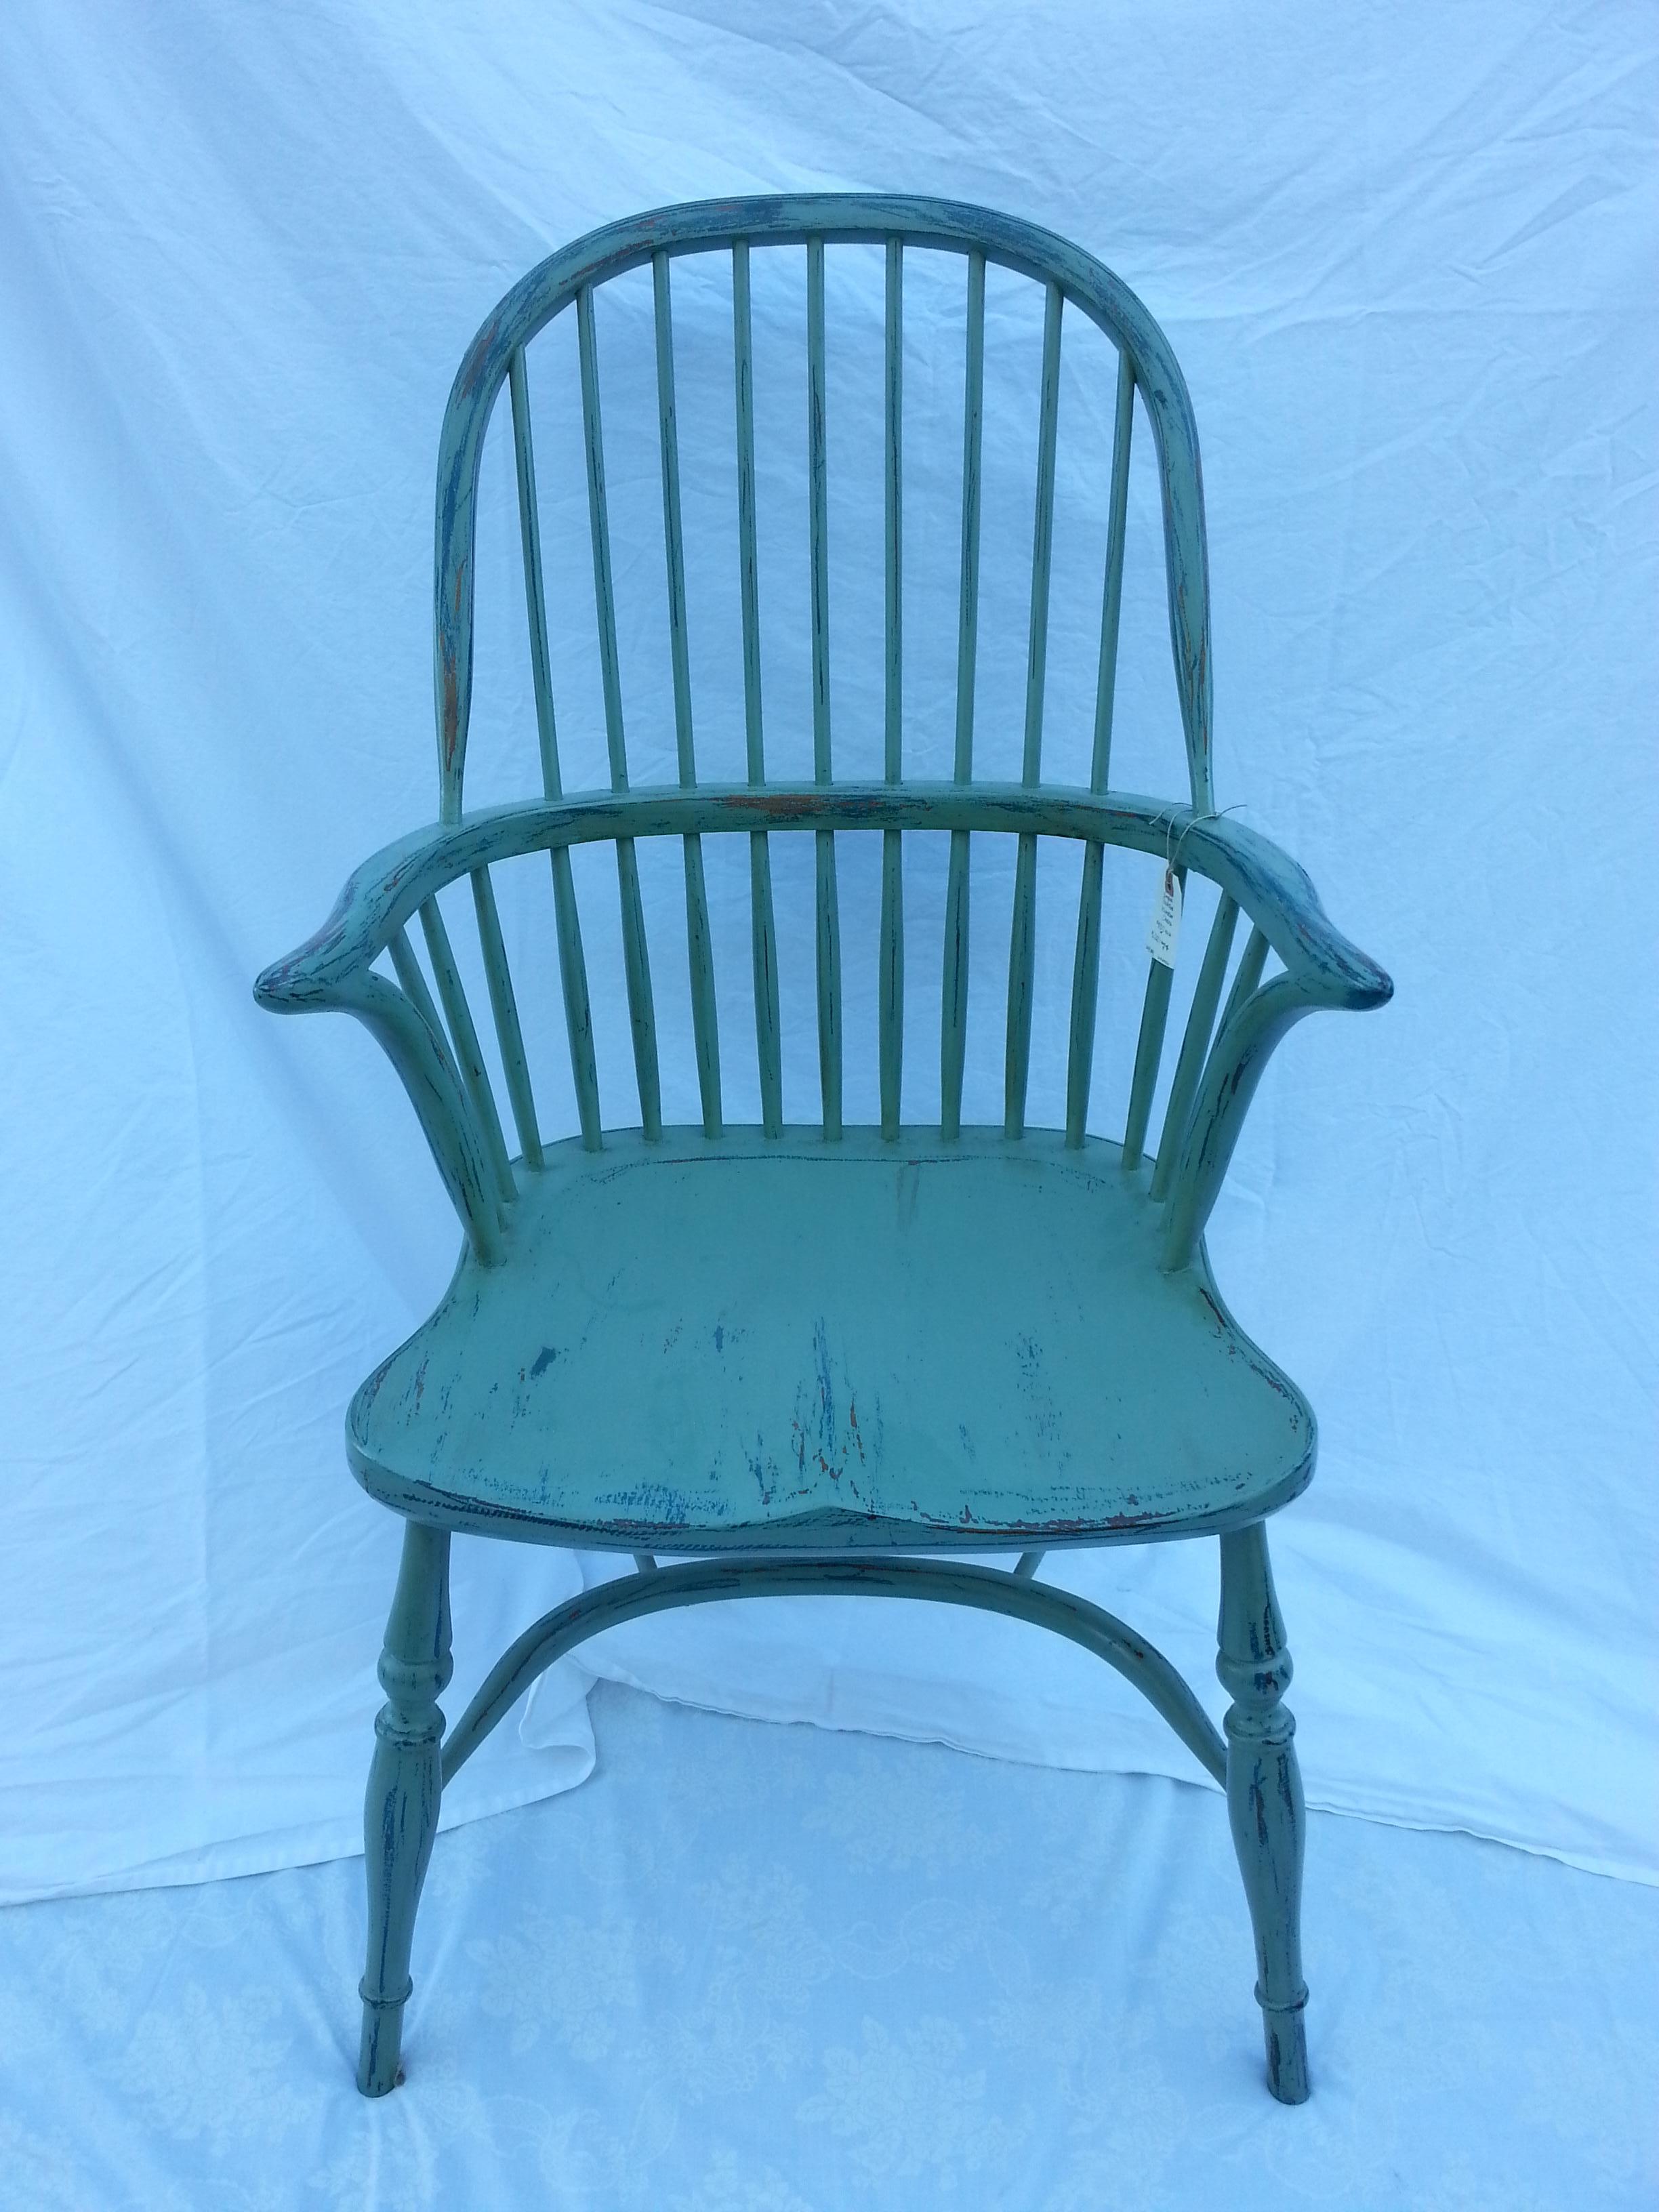 Reproduction Spindle Back Powder Blue Armchair In Excellent Condition For Sale In Nantucket, MA